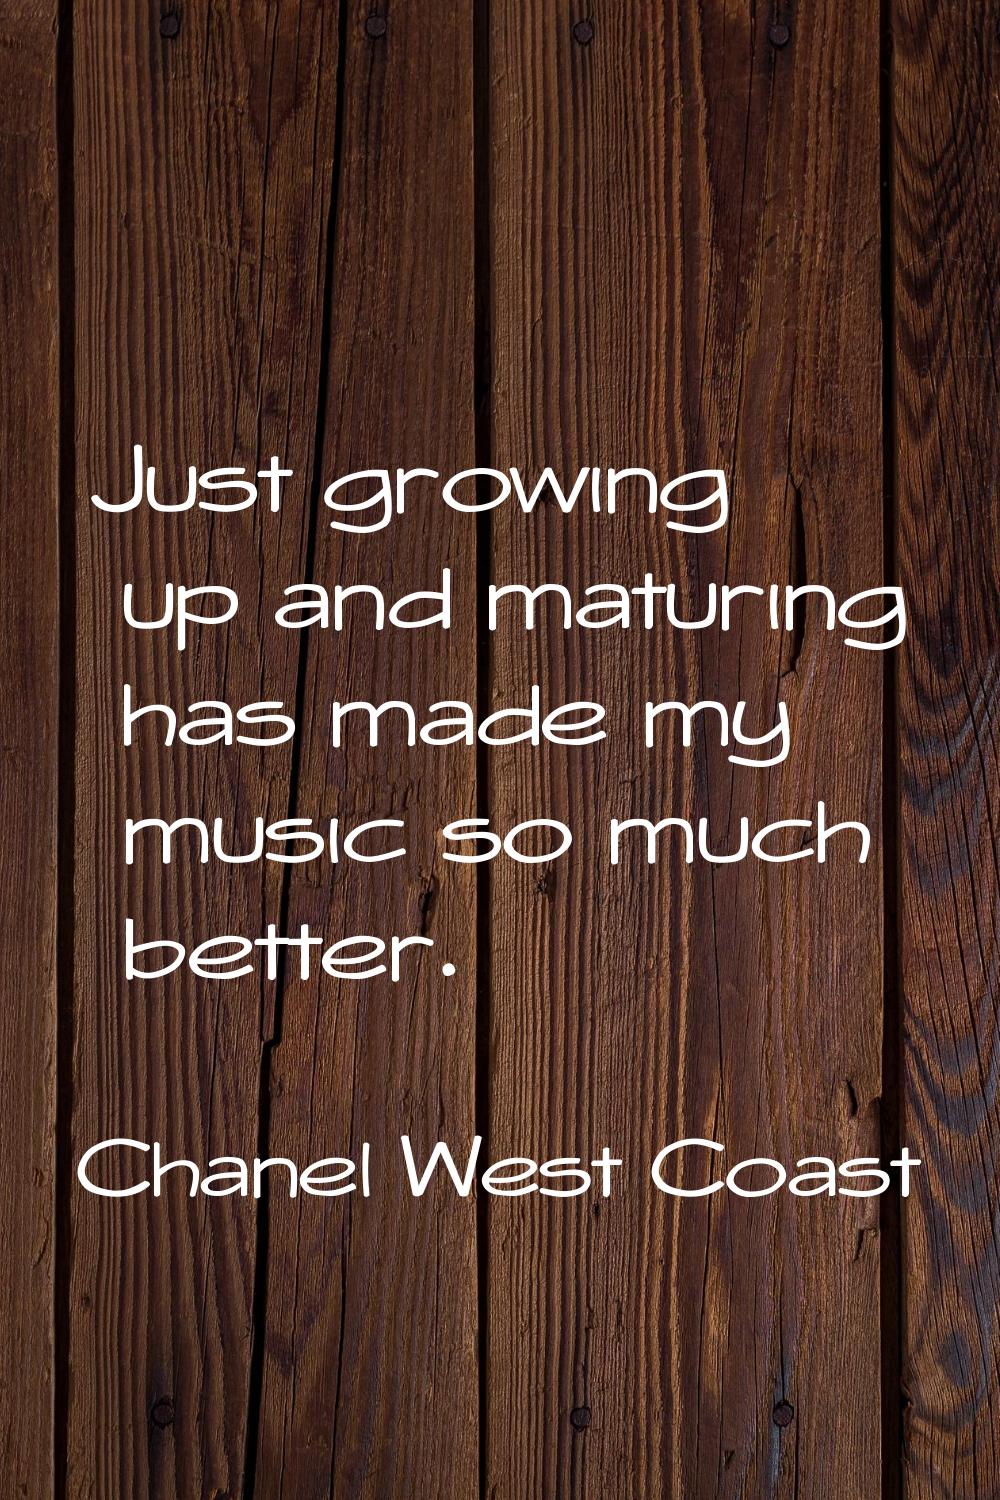 Just growing up and maturing has made my music so much better.